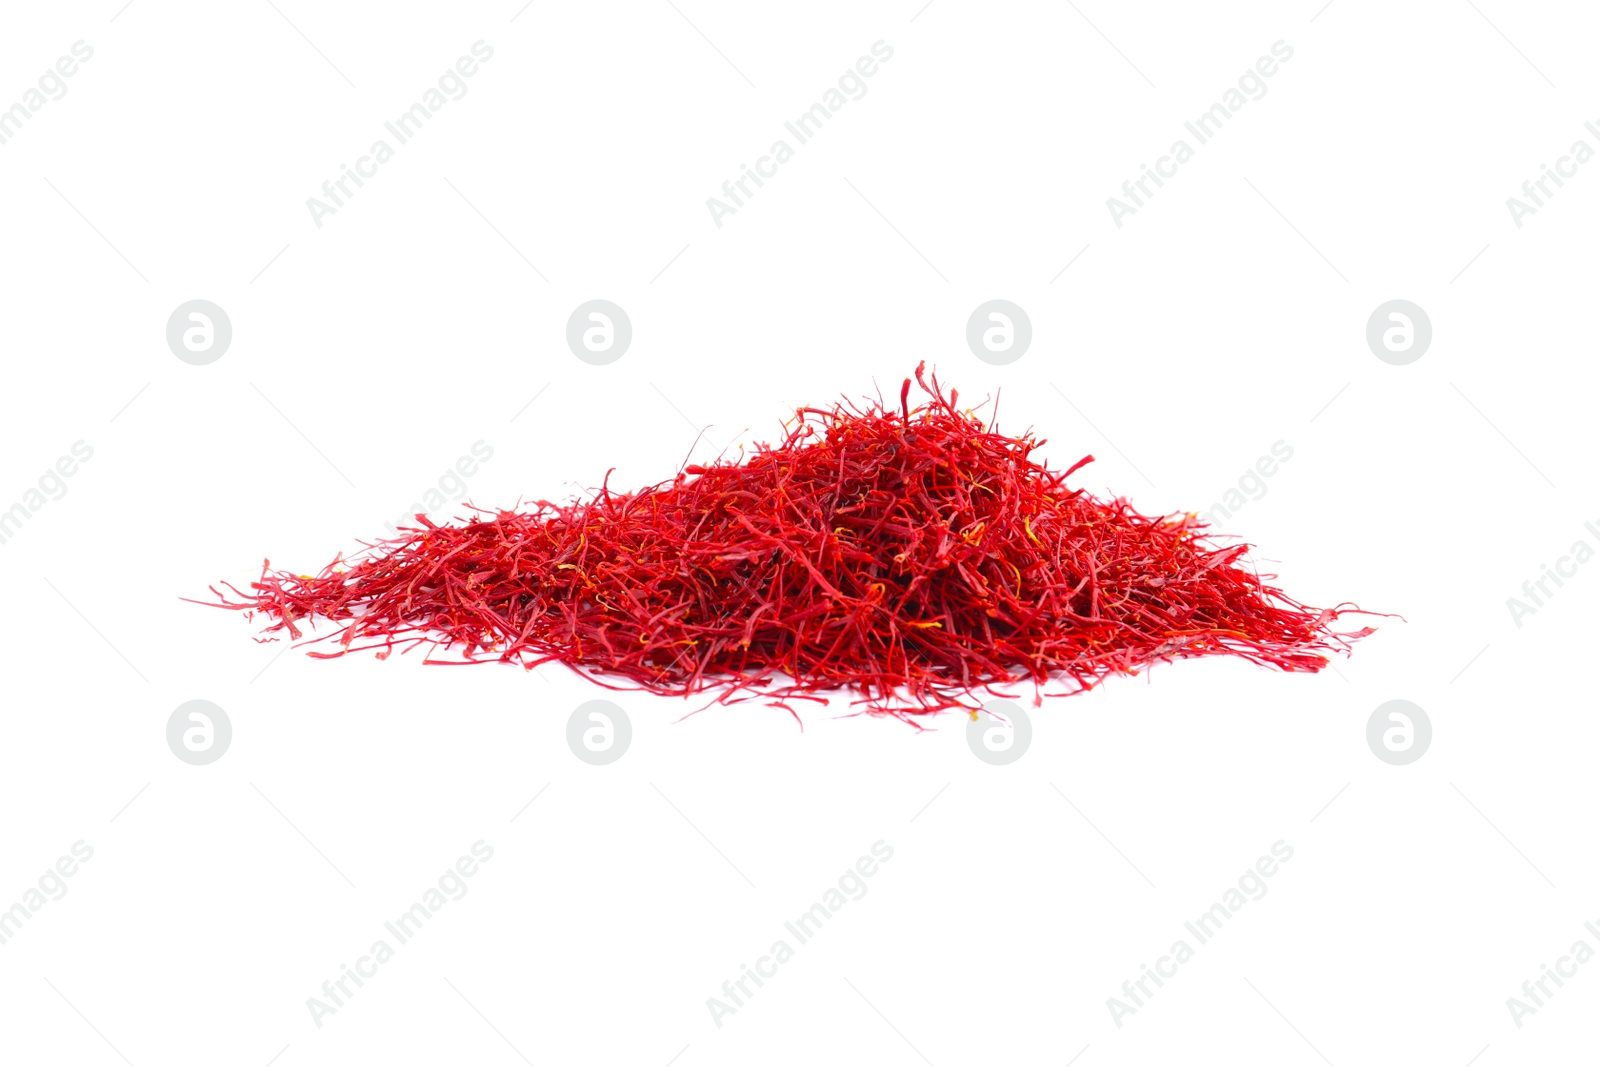 Photo of Pile of dried saffron isolated on white